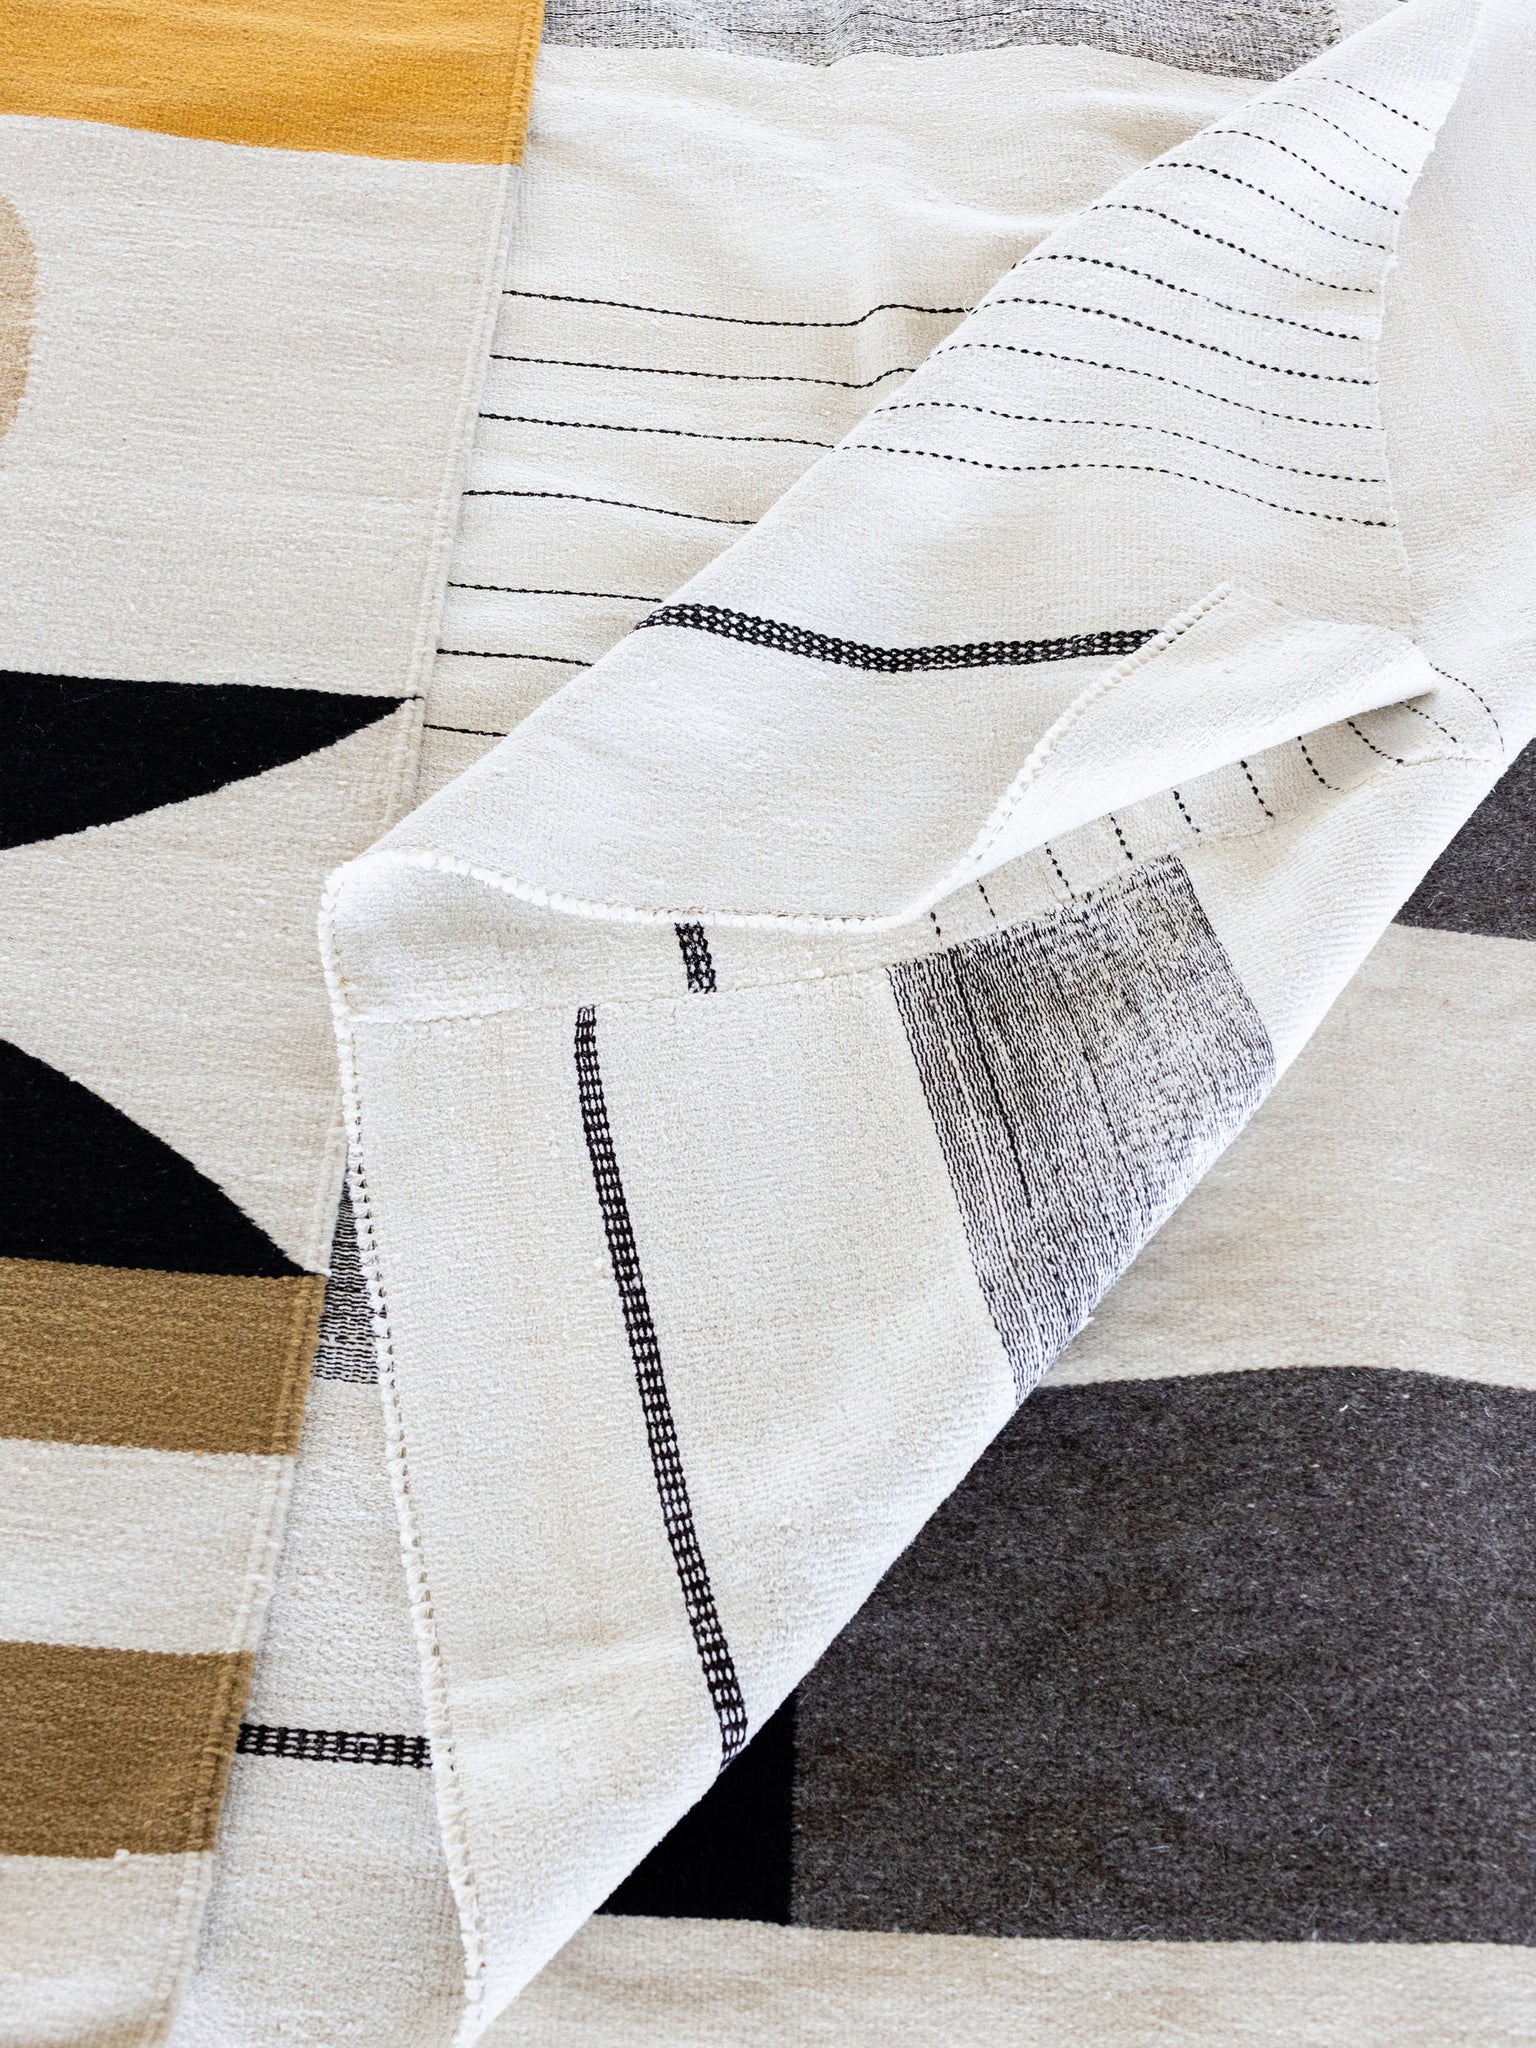 Turkish Anatolian soft ivory and black striped patterned area rug handwoven from vintage recycled hemp fibers